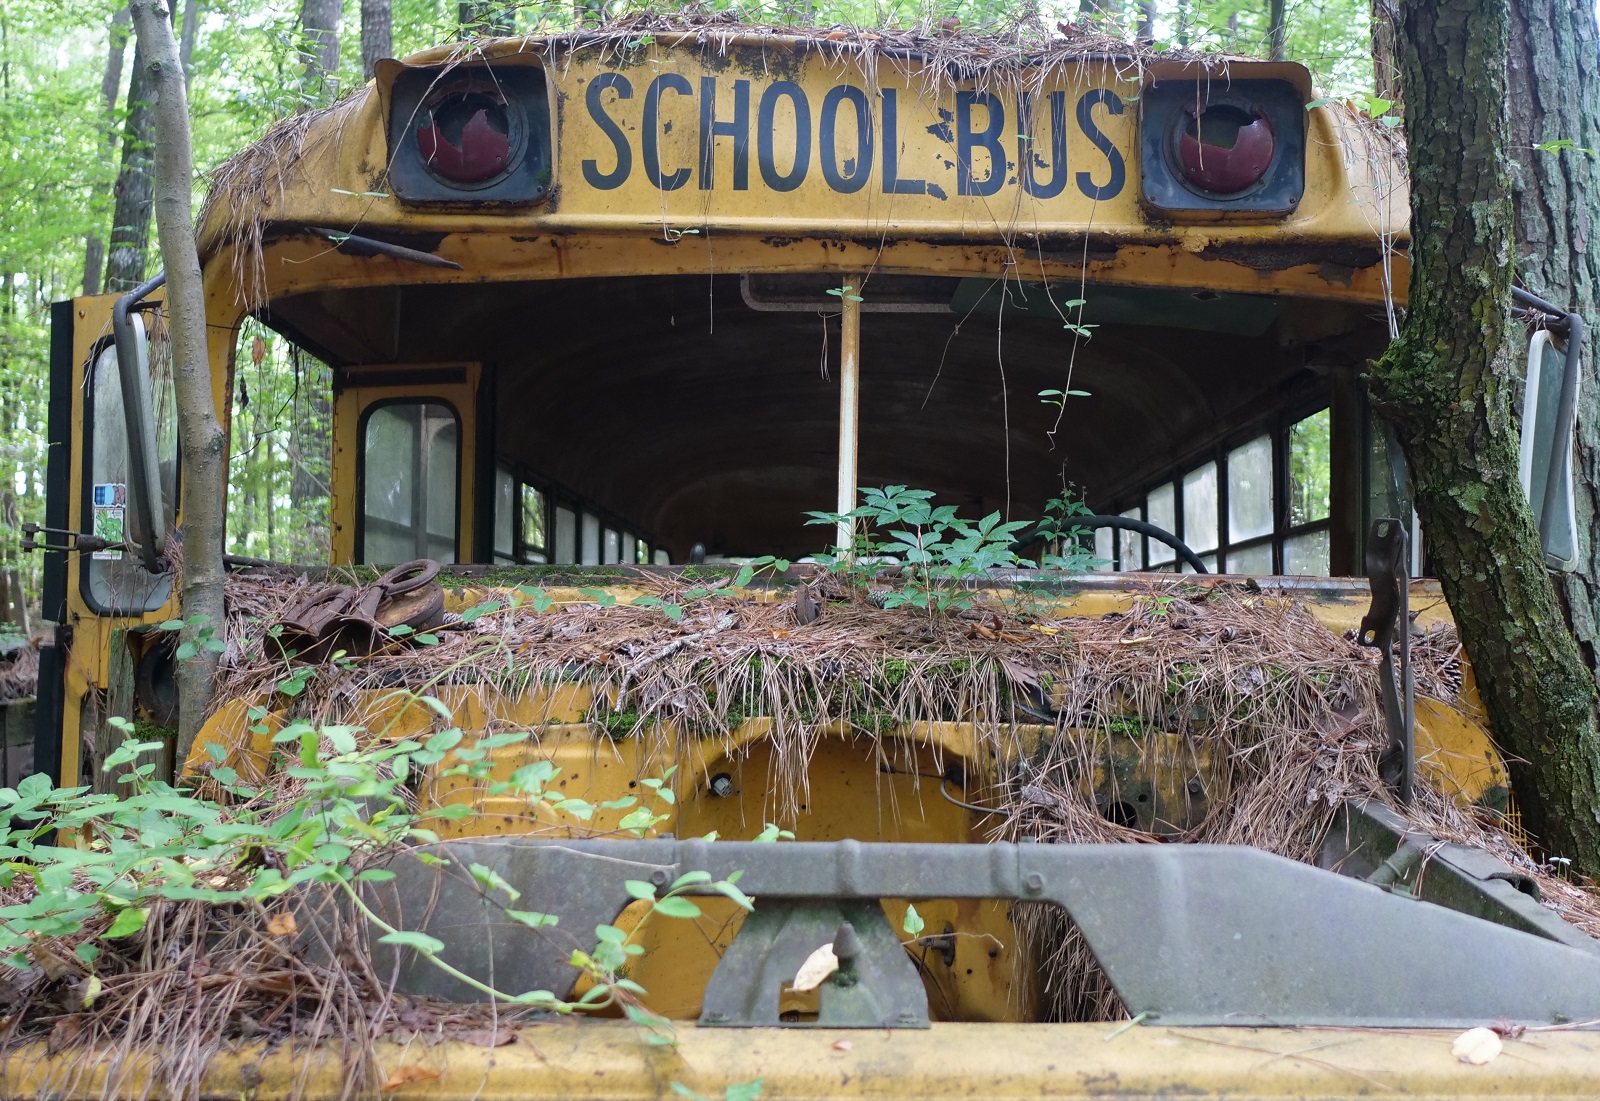 An old school bus at Old Car City USA. Credit – Parker Lewis